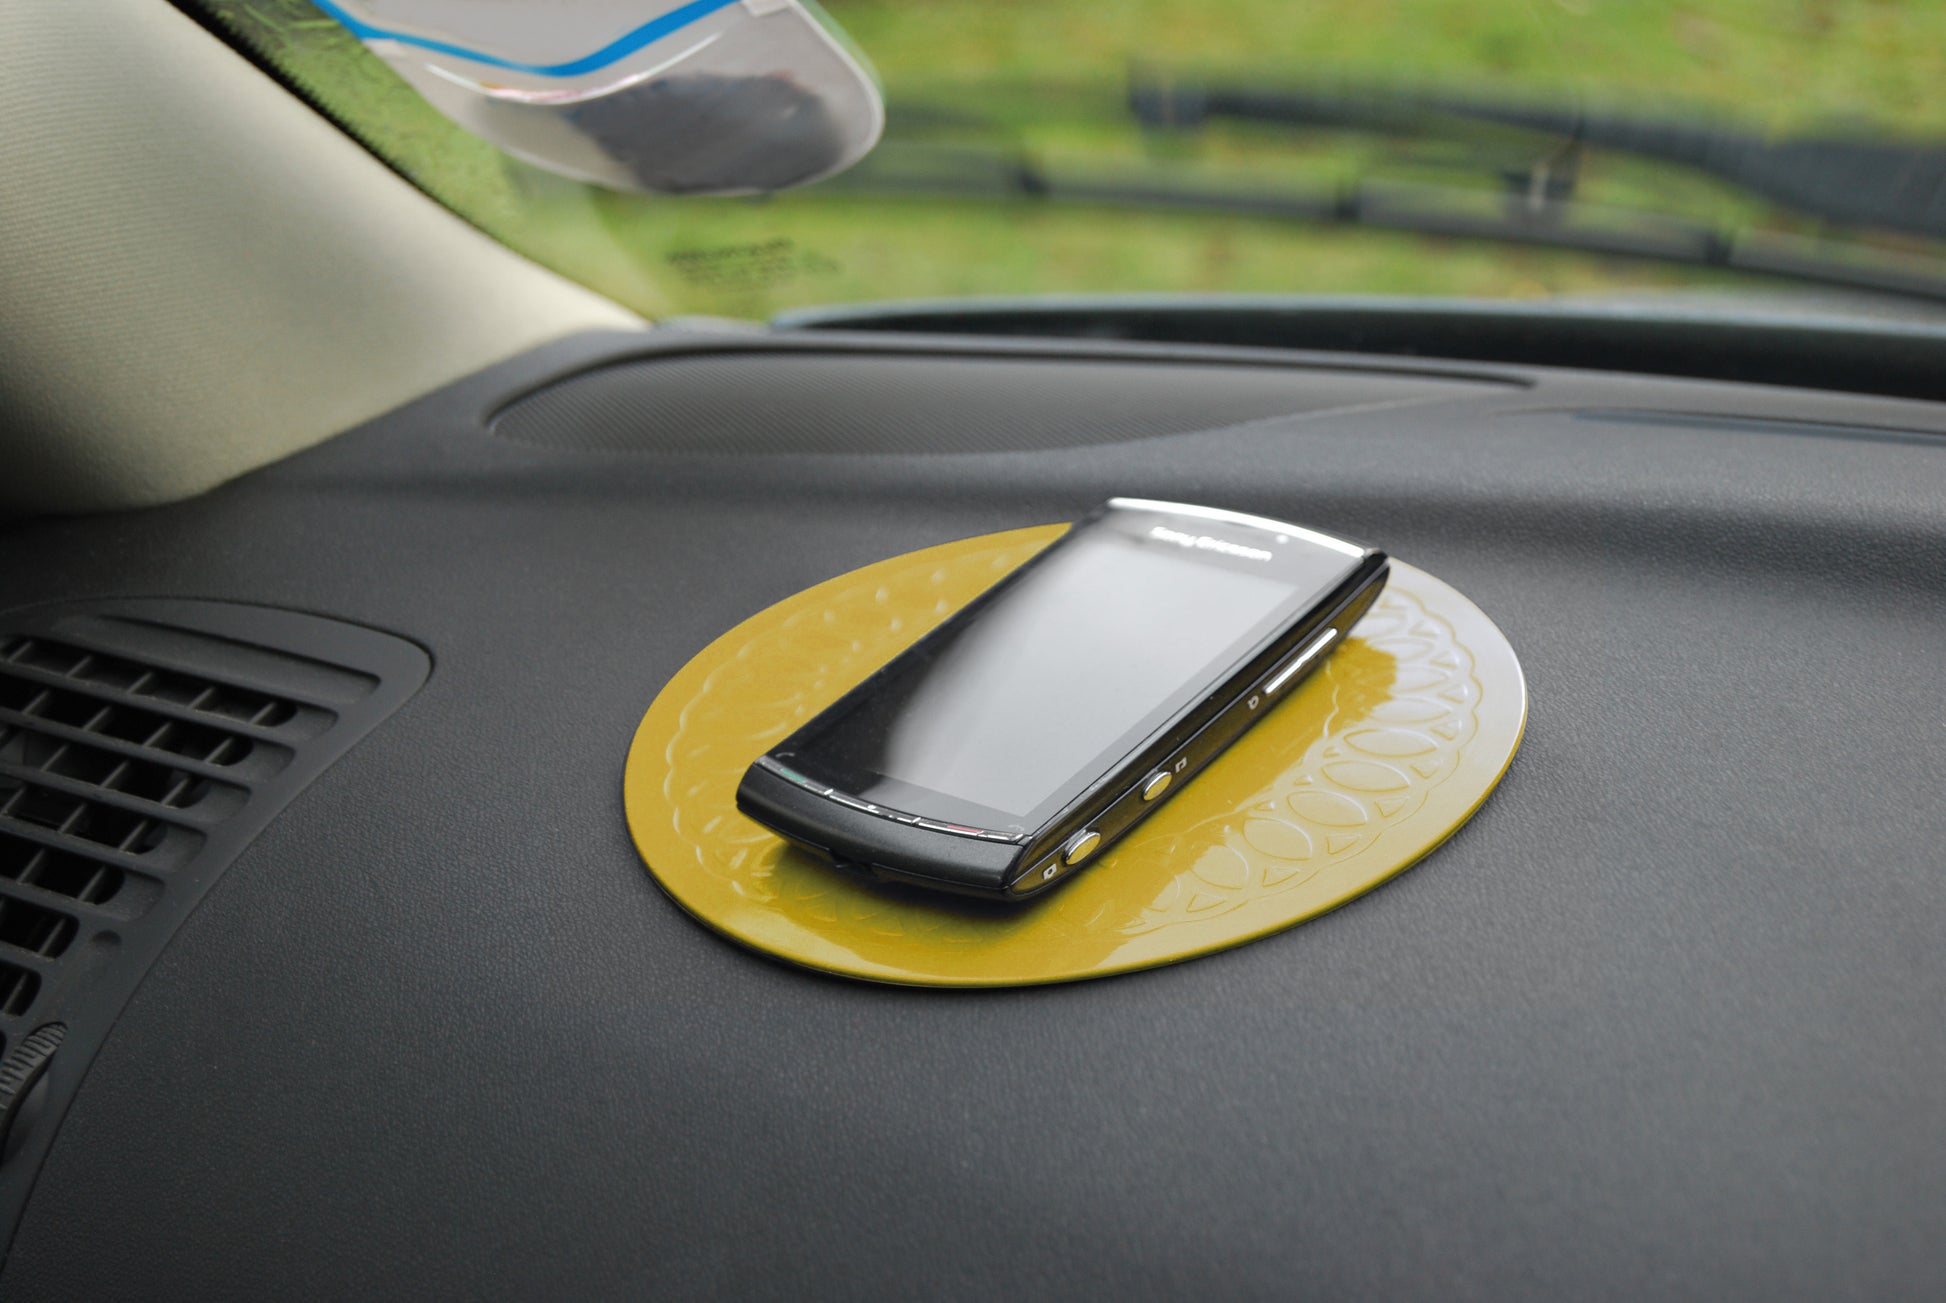 anti-slip yellow coaster on dash of car with cell phone on coaster